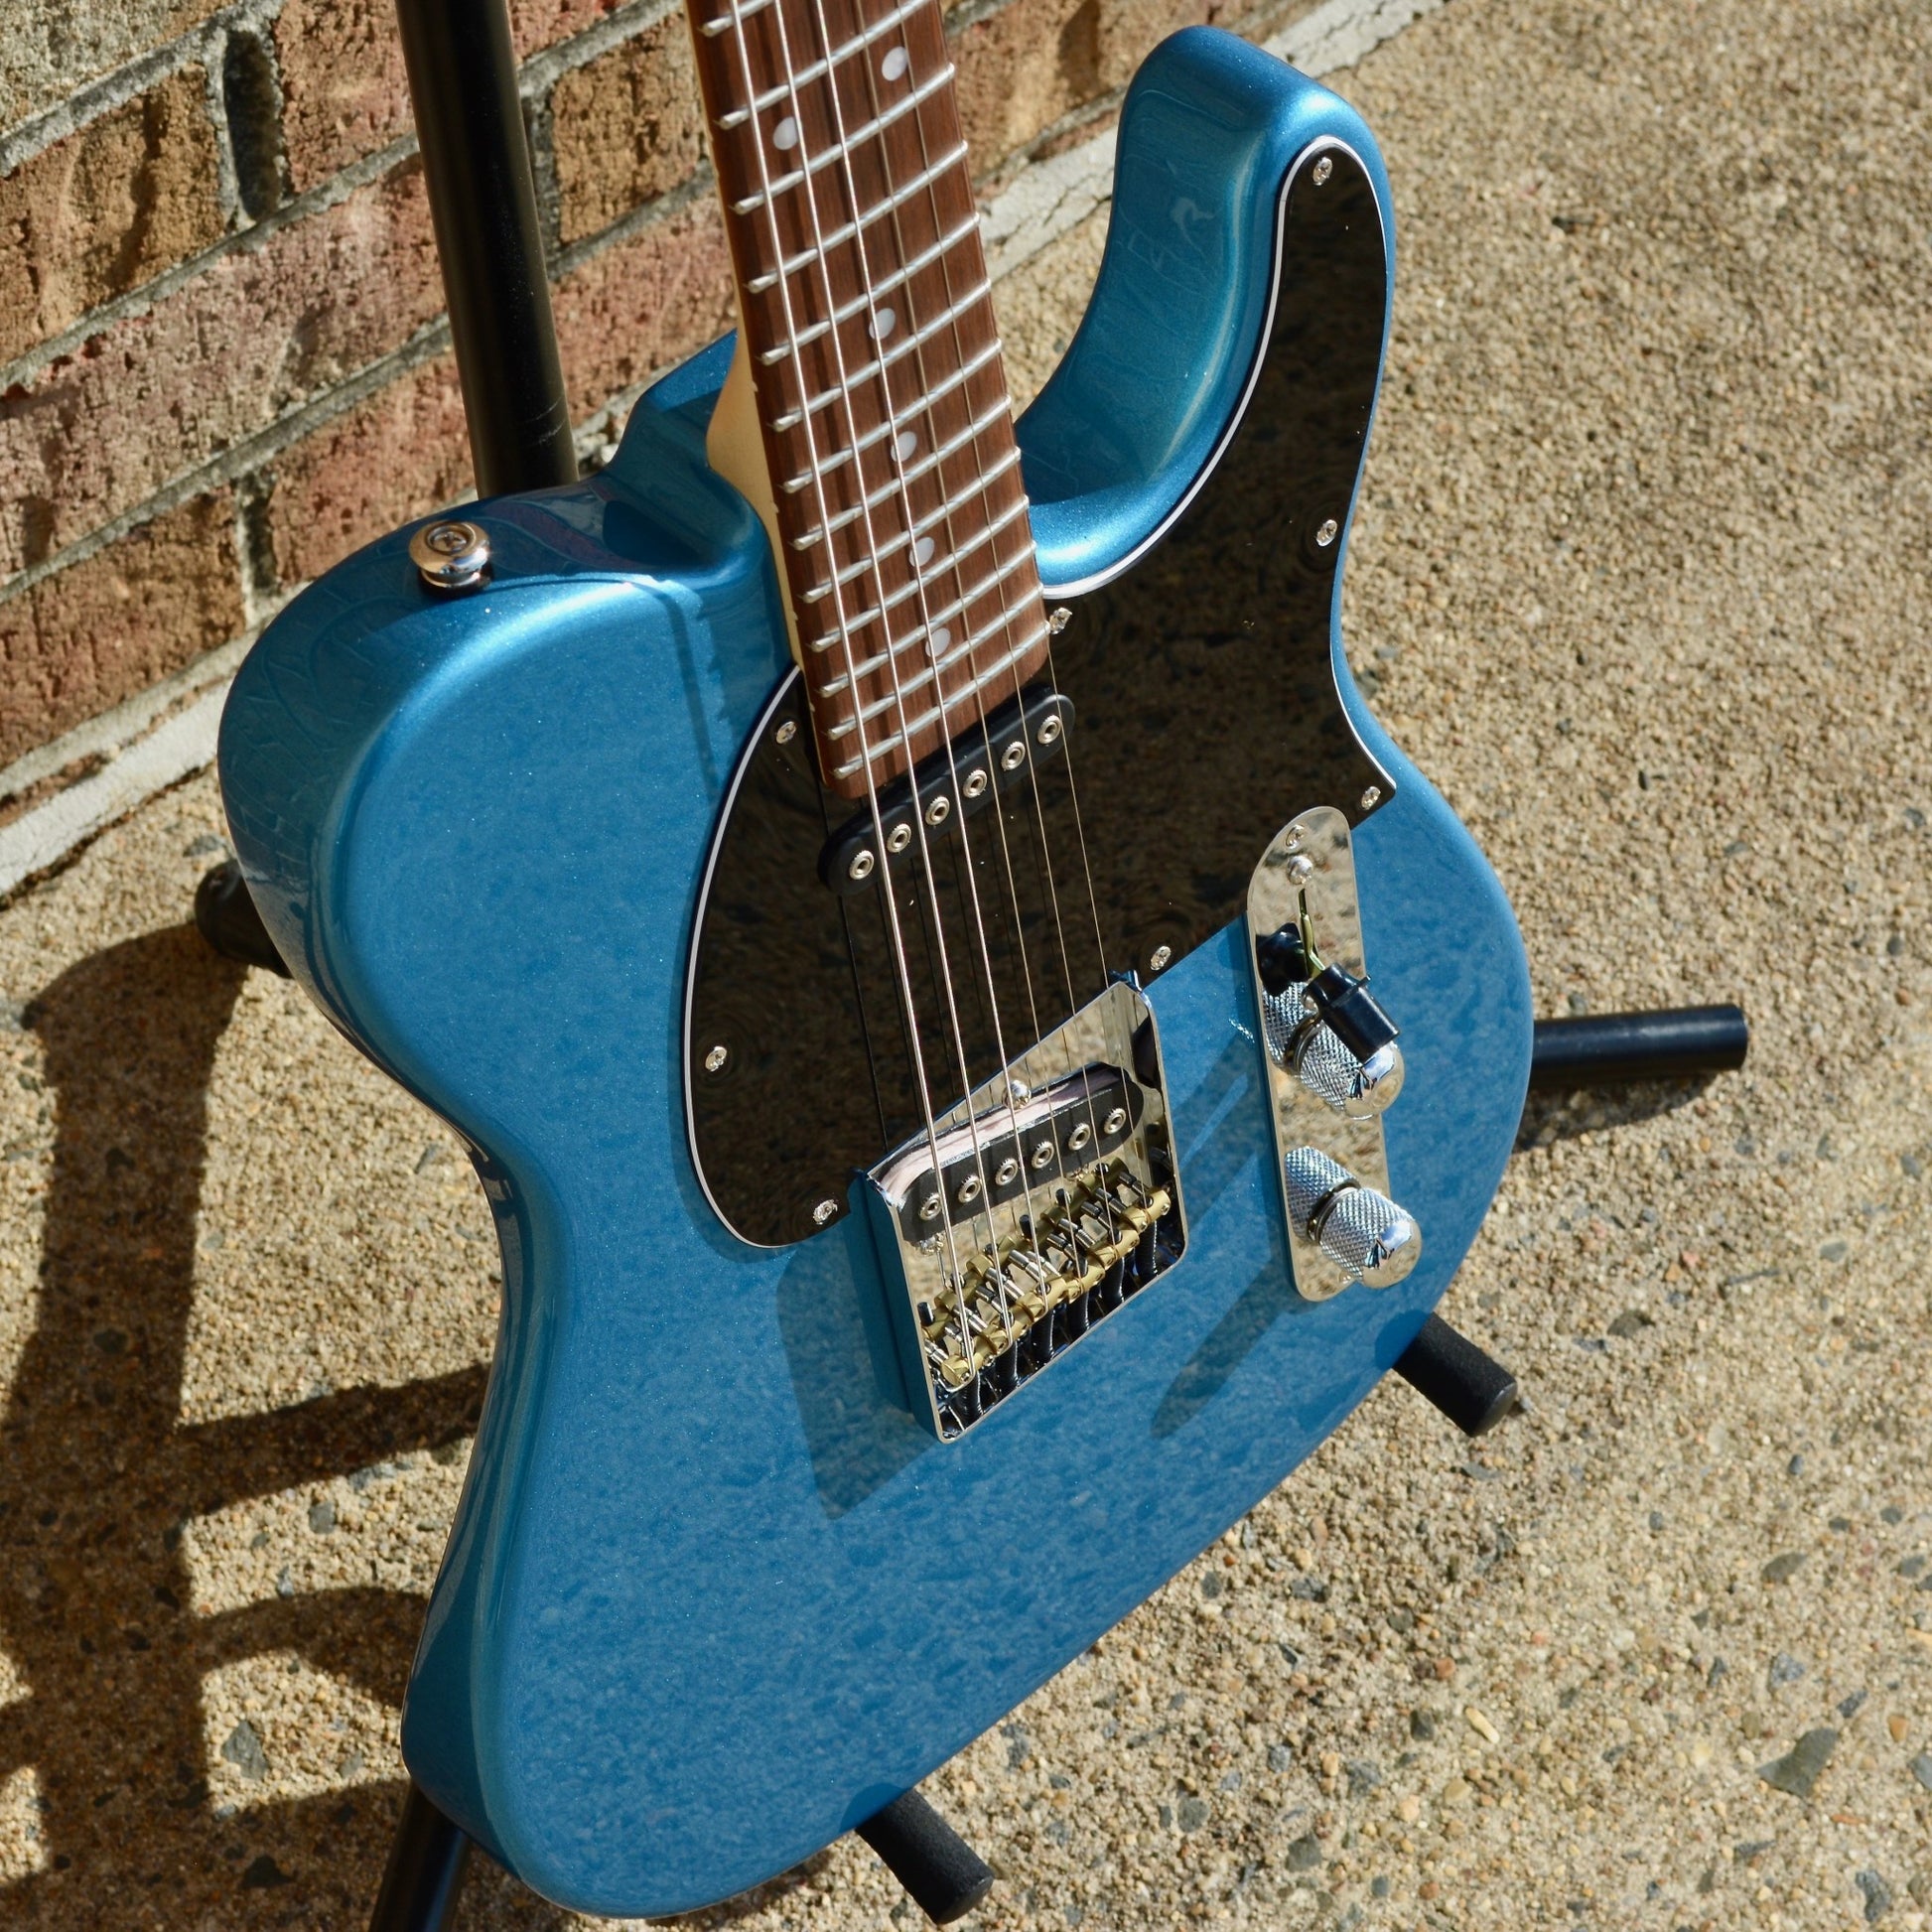 G&L Legacy USA Fullerton Deluxe in Lake Placid Blue